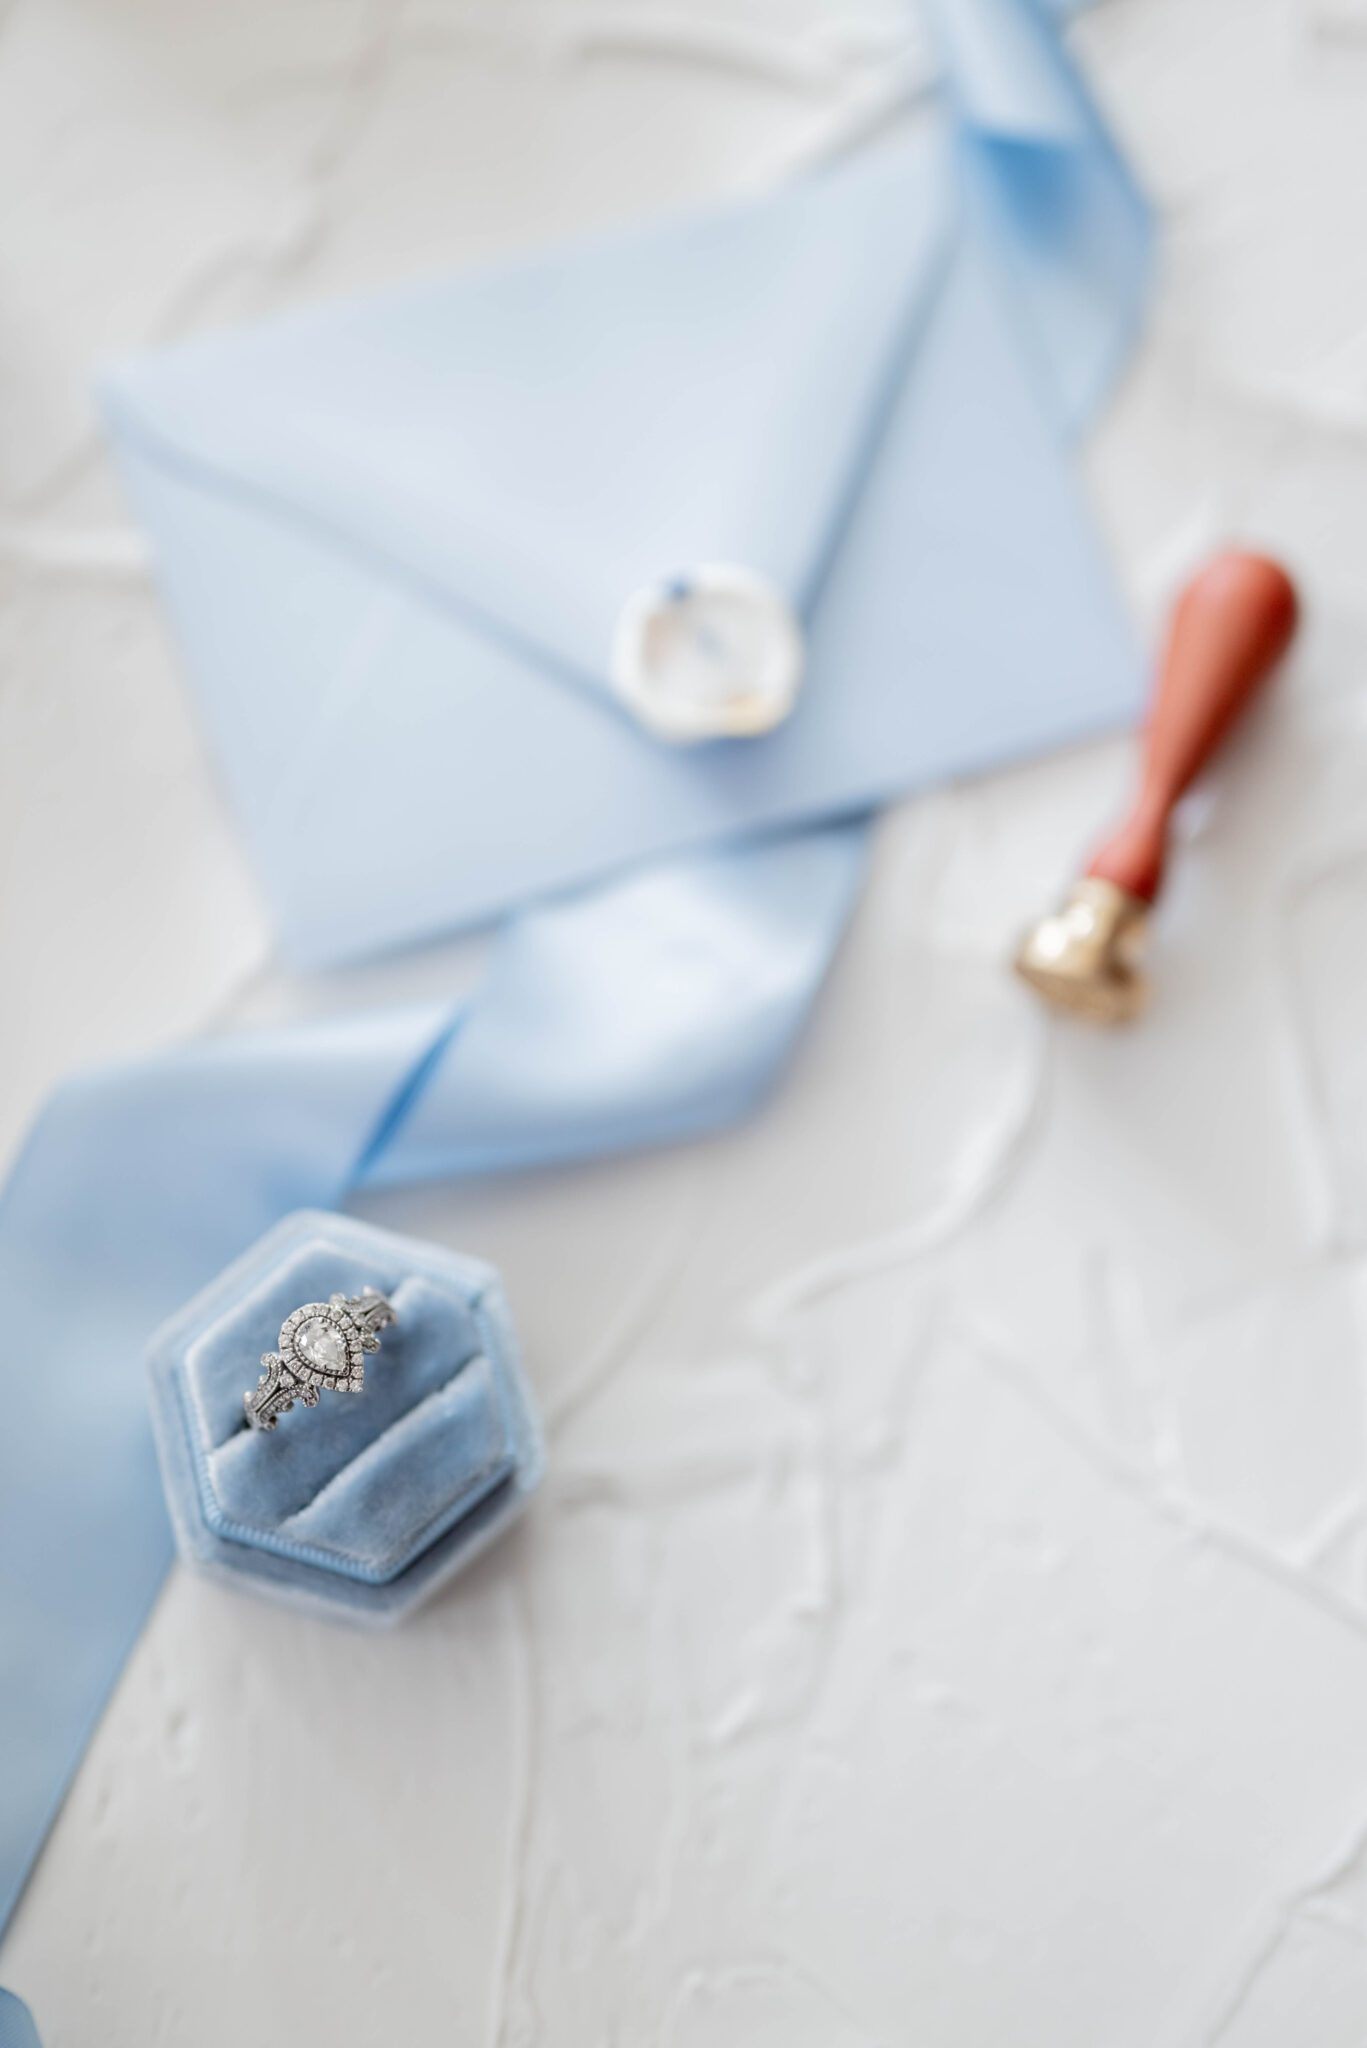 Flat lay photo featuring vintage pear engagement ring in baby blue velvet box, blurred background showing baby blue ribbon accents, baby blue envelope with a white wax seal and brass stamp, plaster table top design ideas